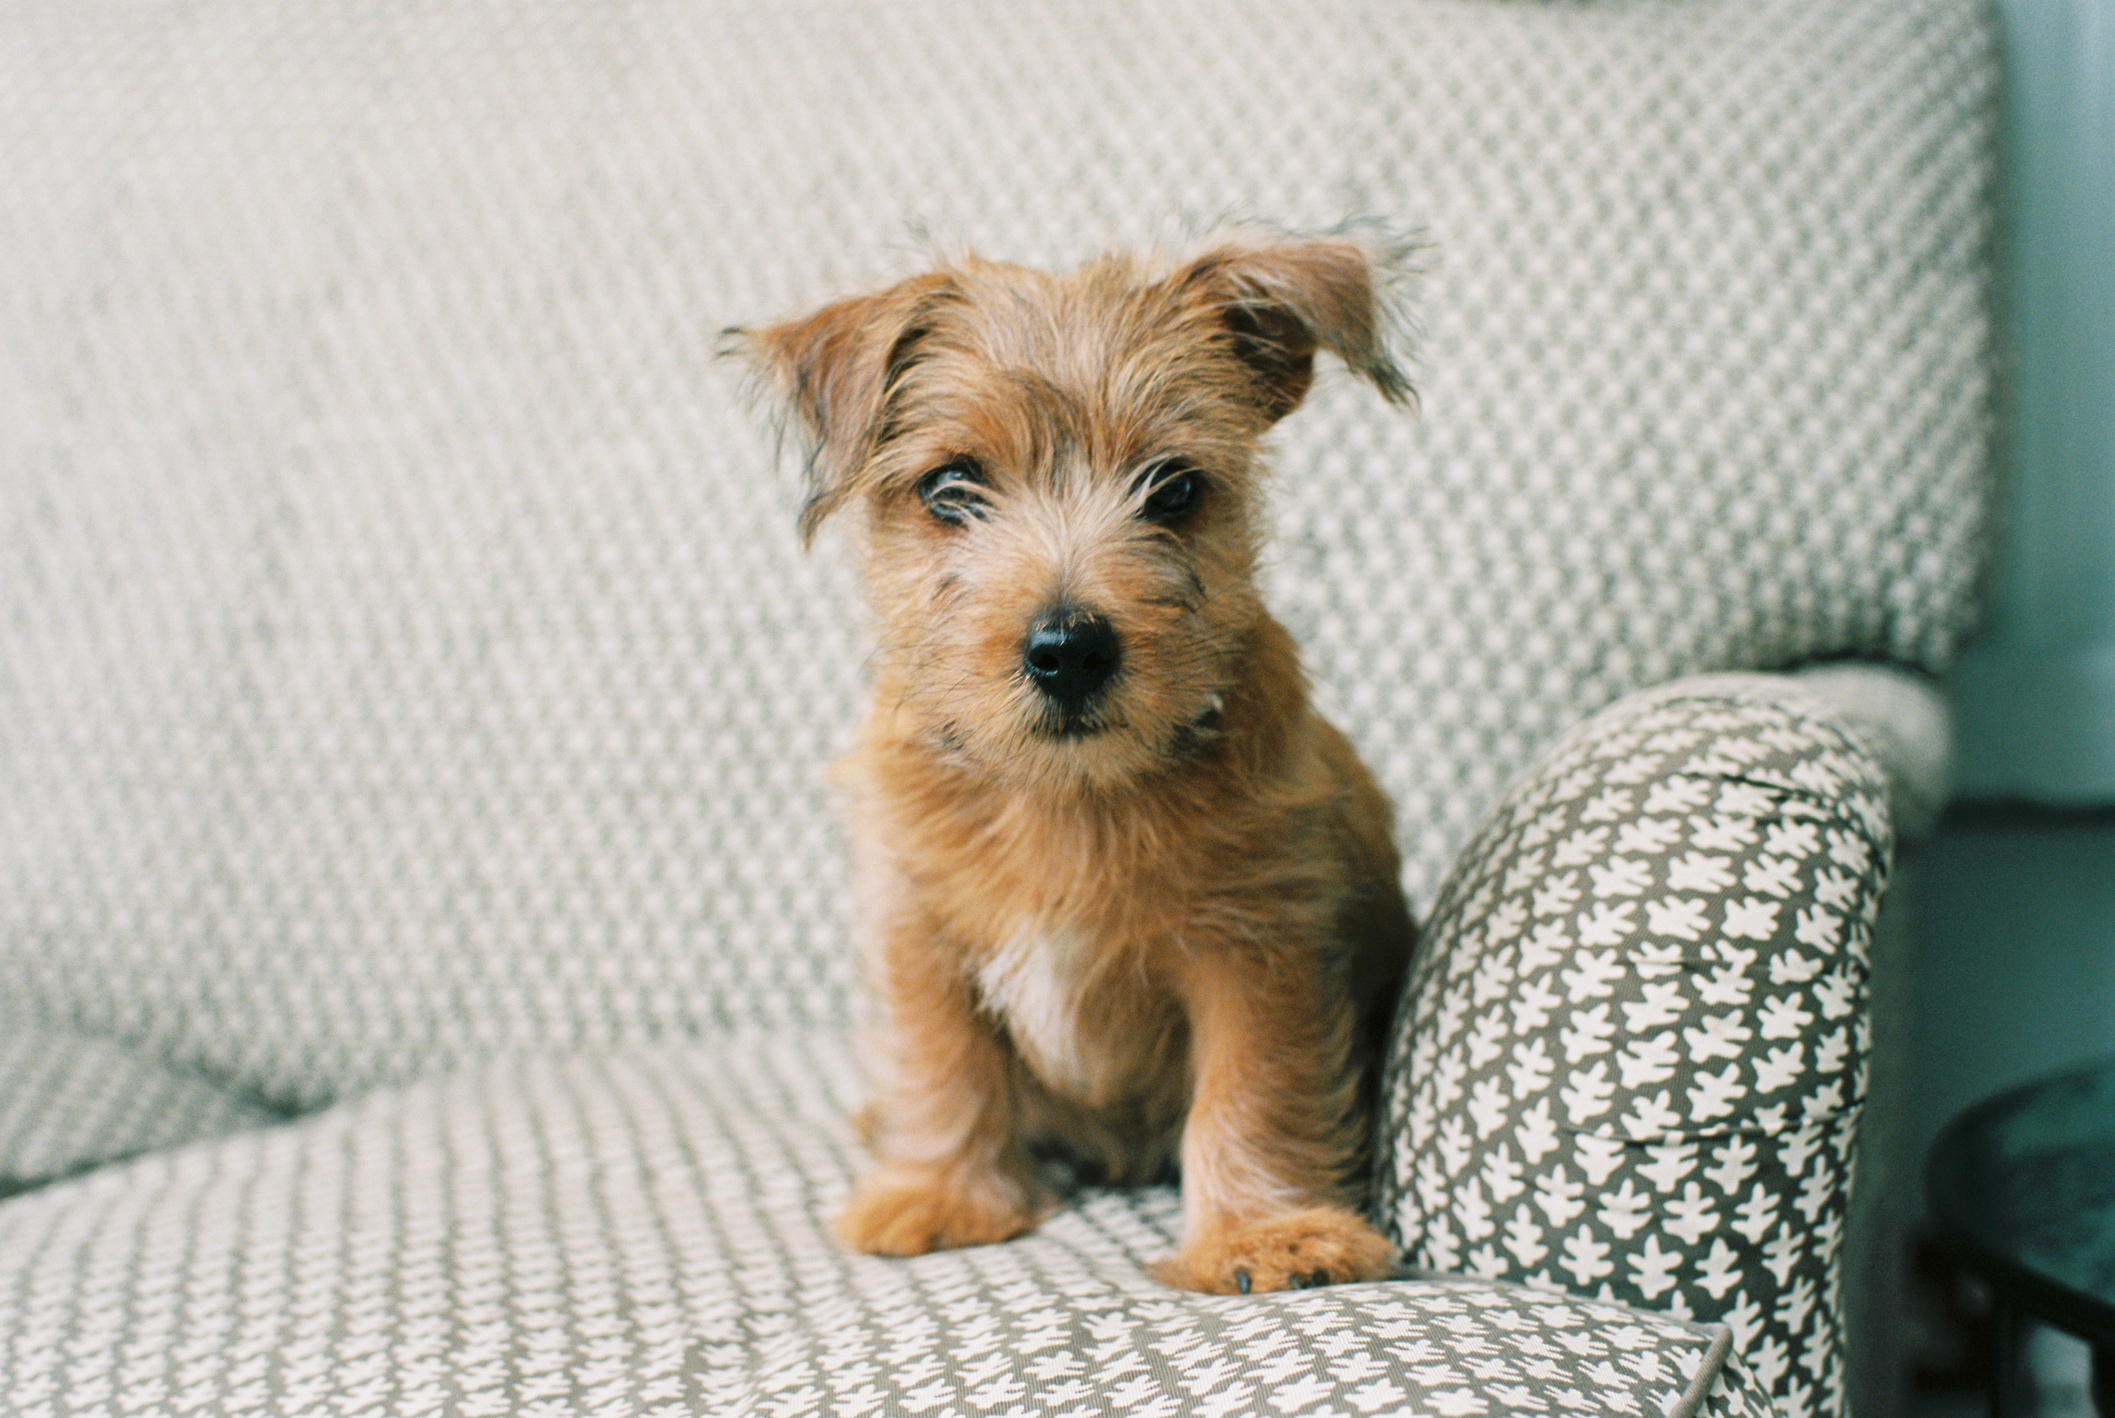 How to get your puppy used to being home alone: Tips from a training expert